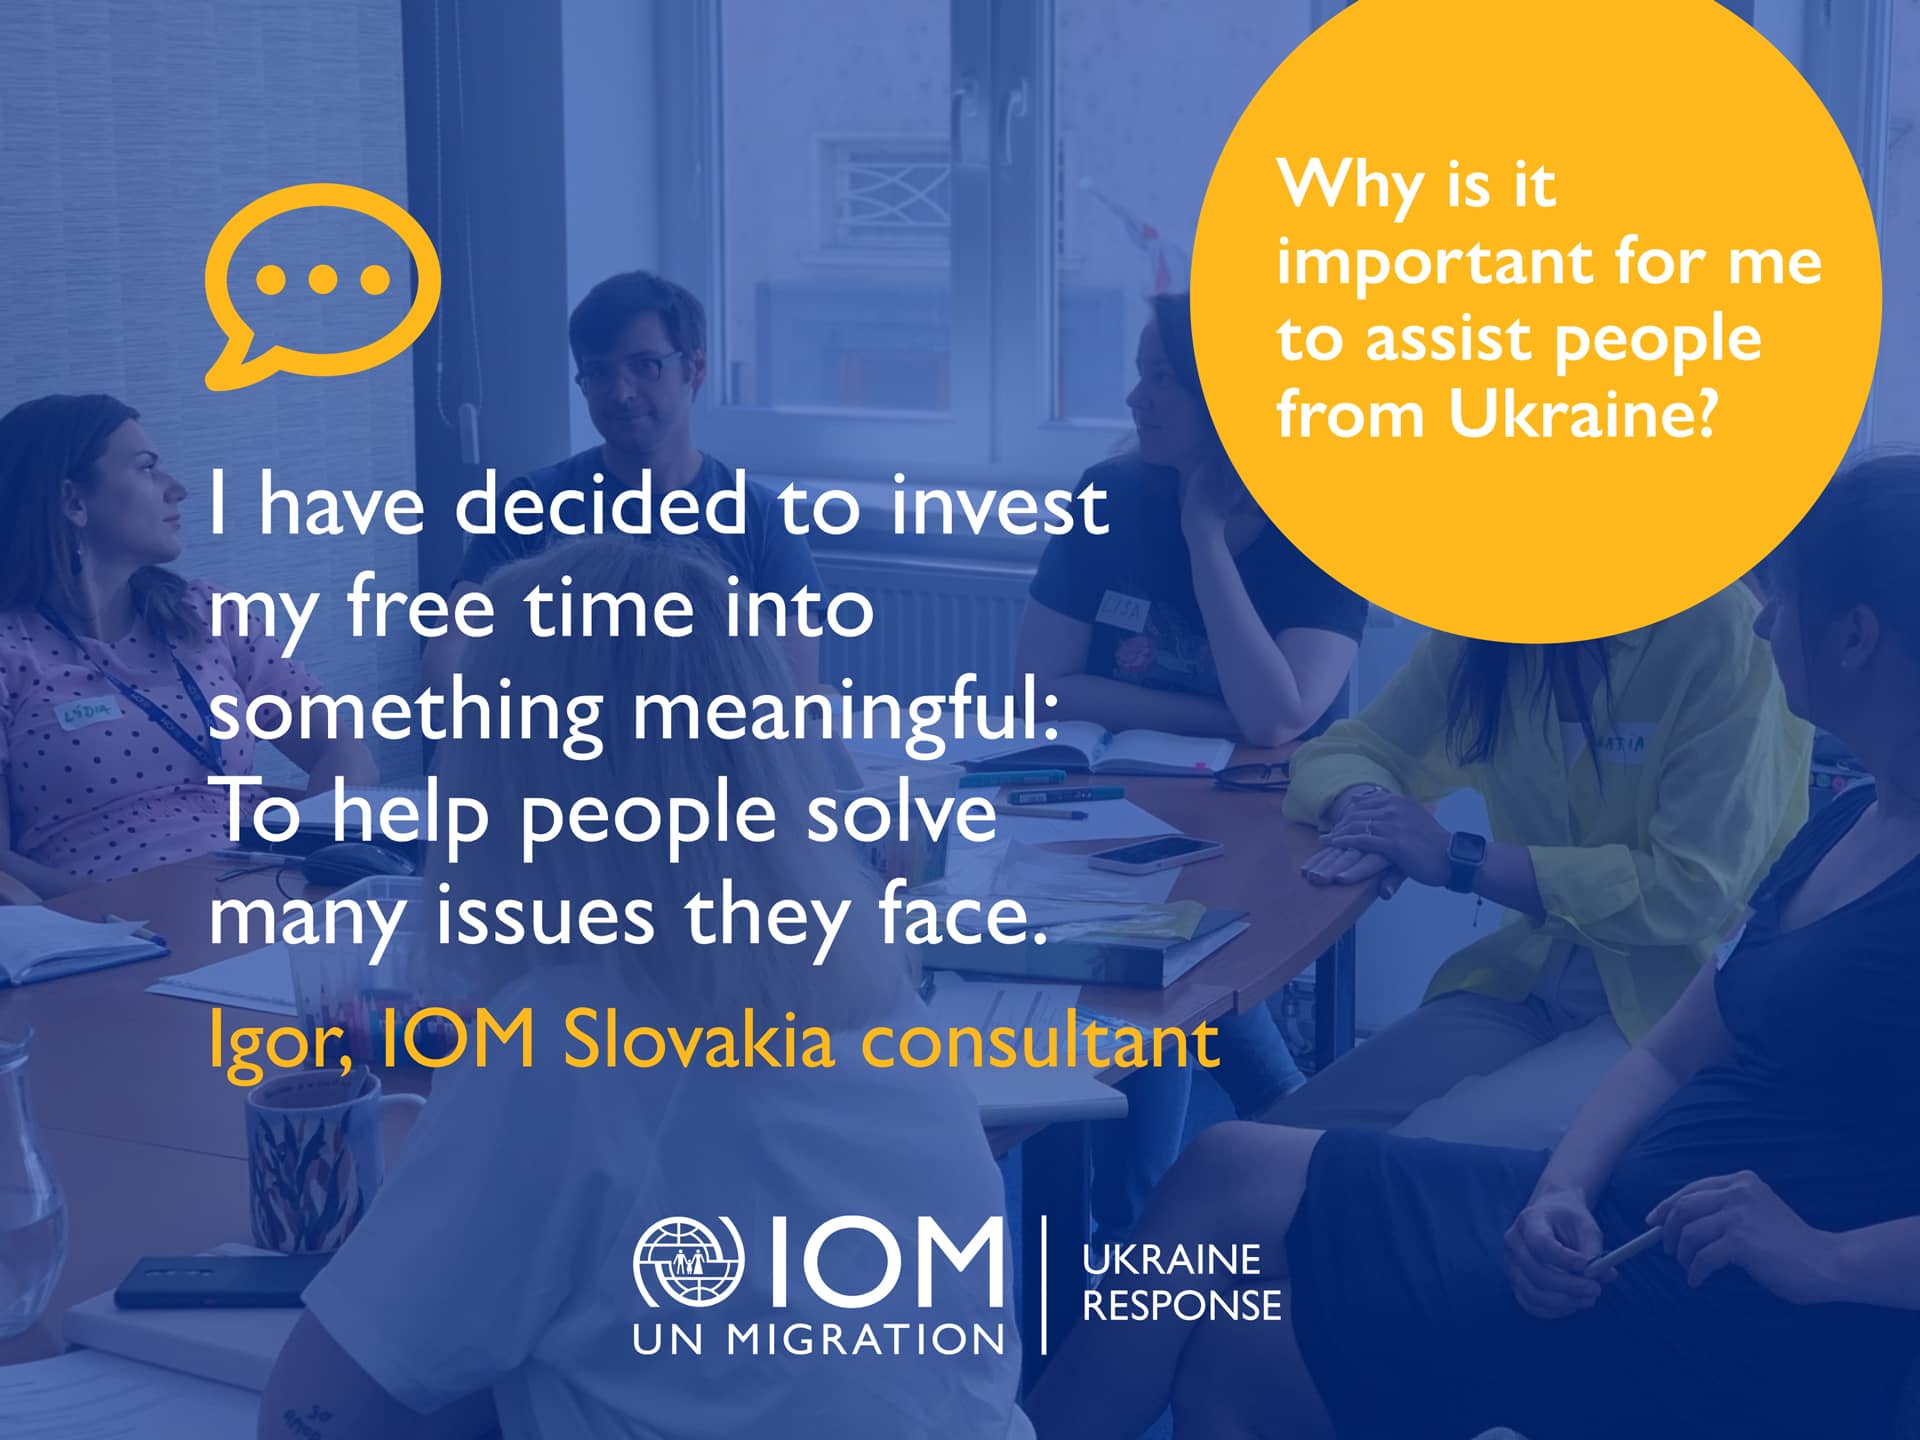 Igor, IOM Slovakia consultant - Why it is important for me to assist people from Ukraine